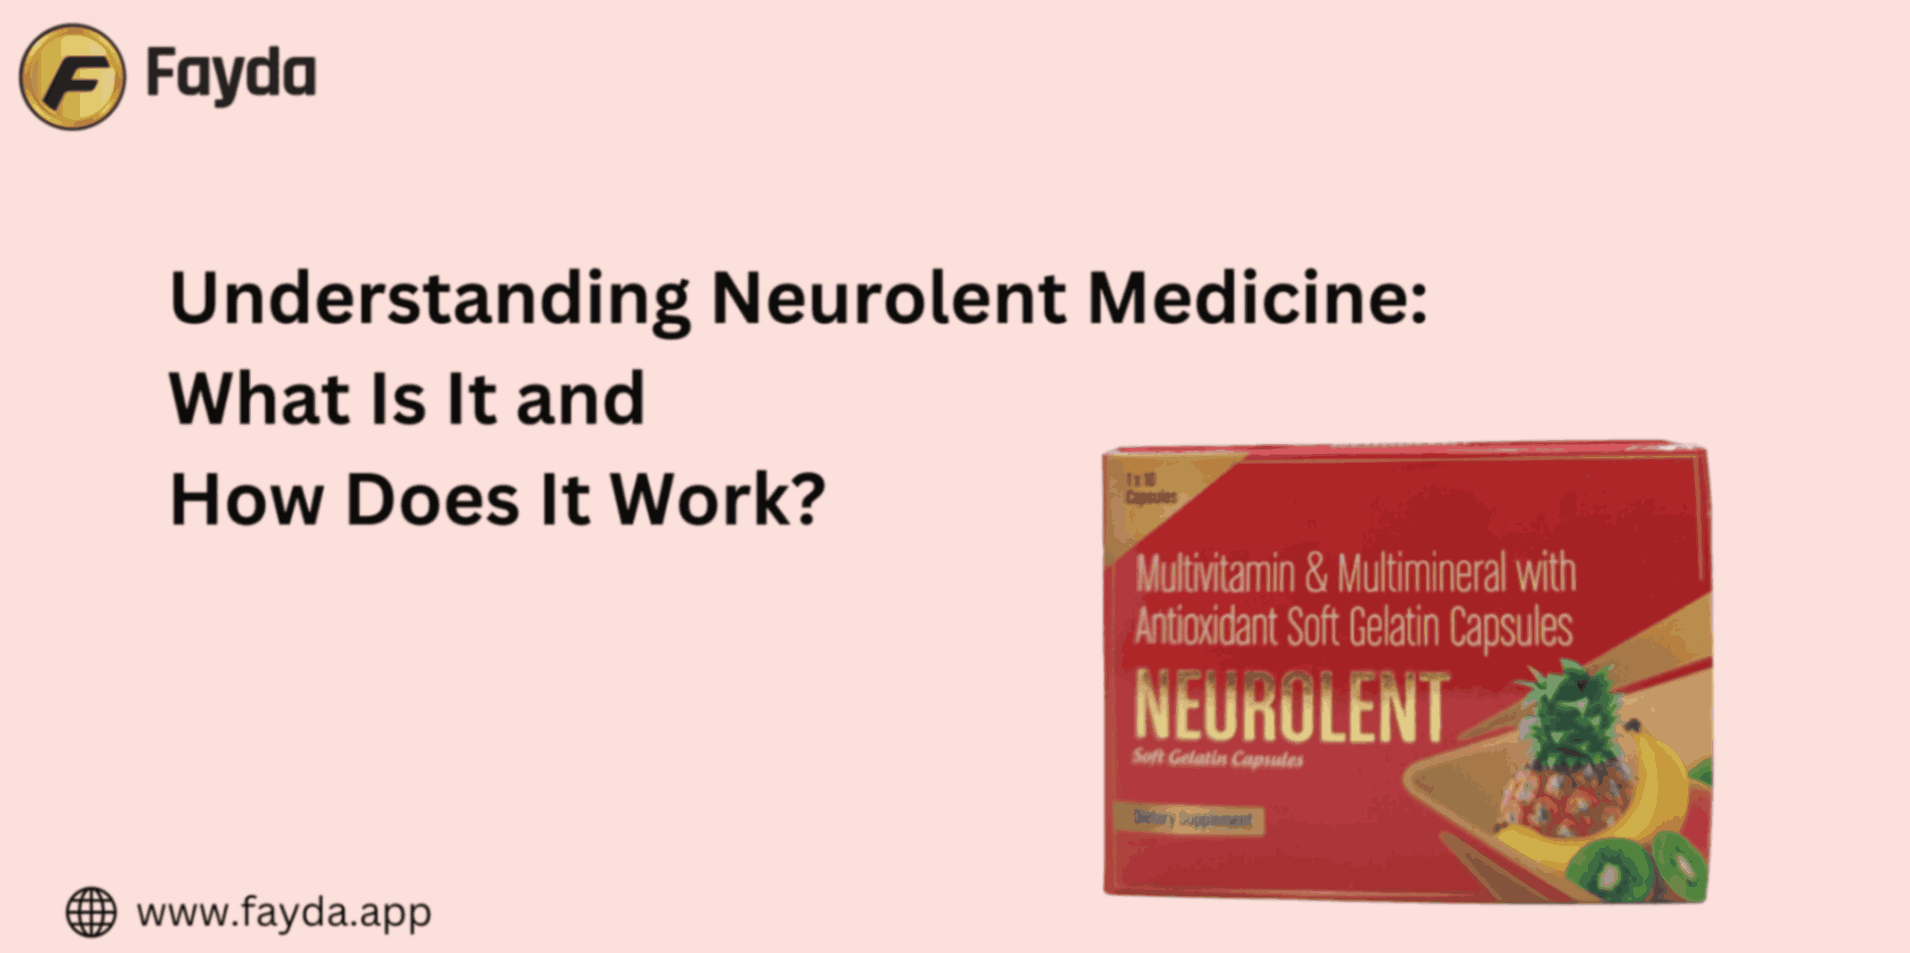 Understanding Neurolent Medicine: What Is It and How Does It Work?